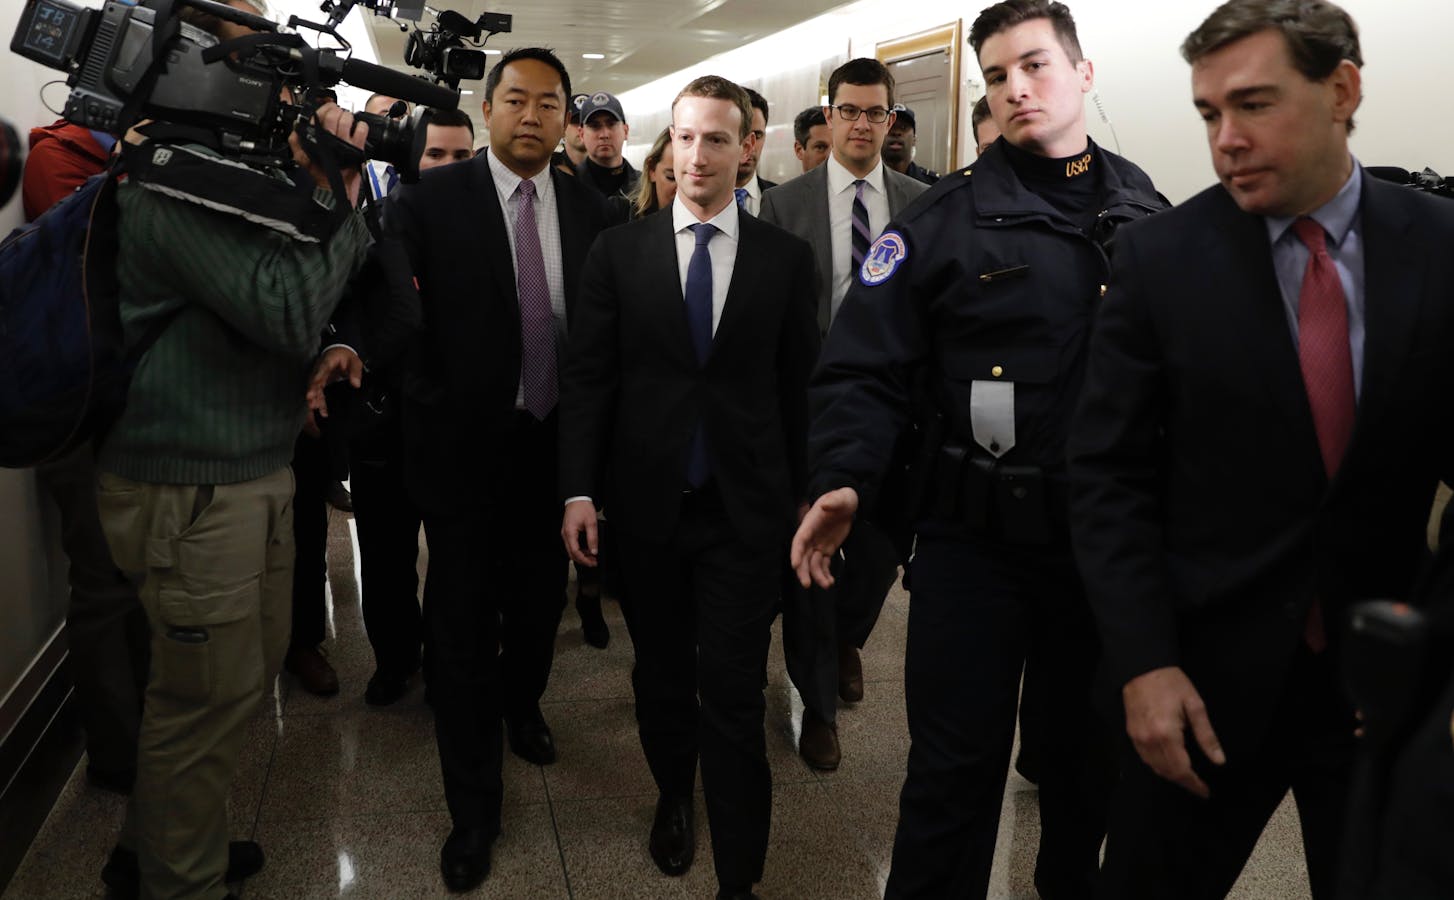 Facebook CEO Mark Zuckerberg arriving for a meeting with Sen. John Thune on Monday. Photo by Bloomberg.